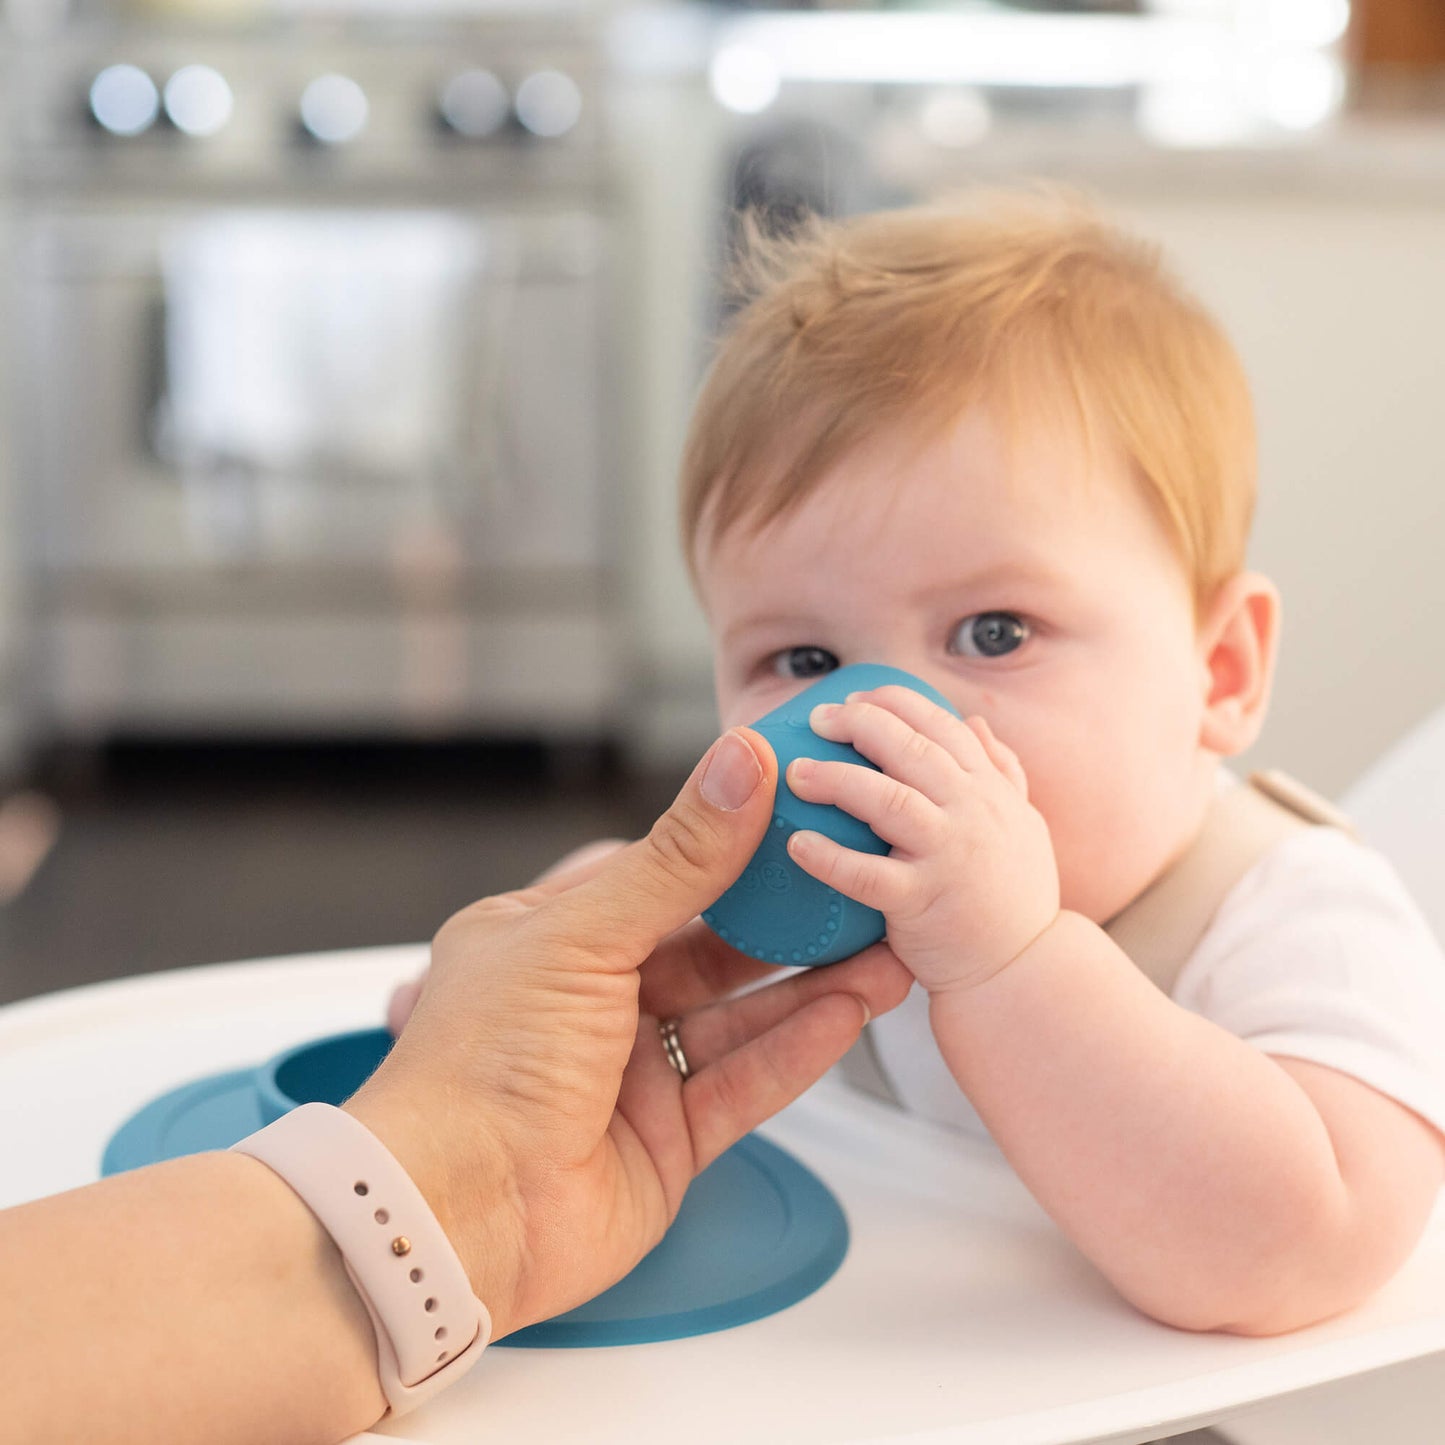 The Tiny Cup in Blue by ezpz / Open-Top, Silicone Drinking Cup for Babies